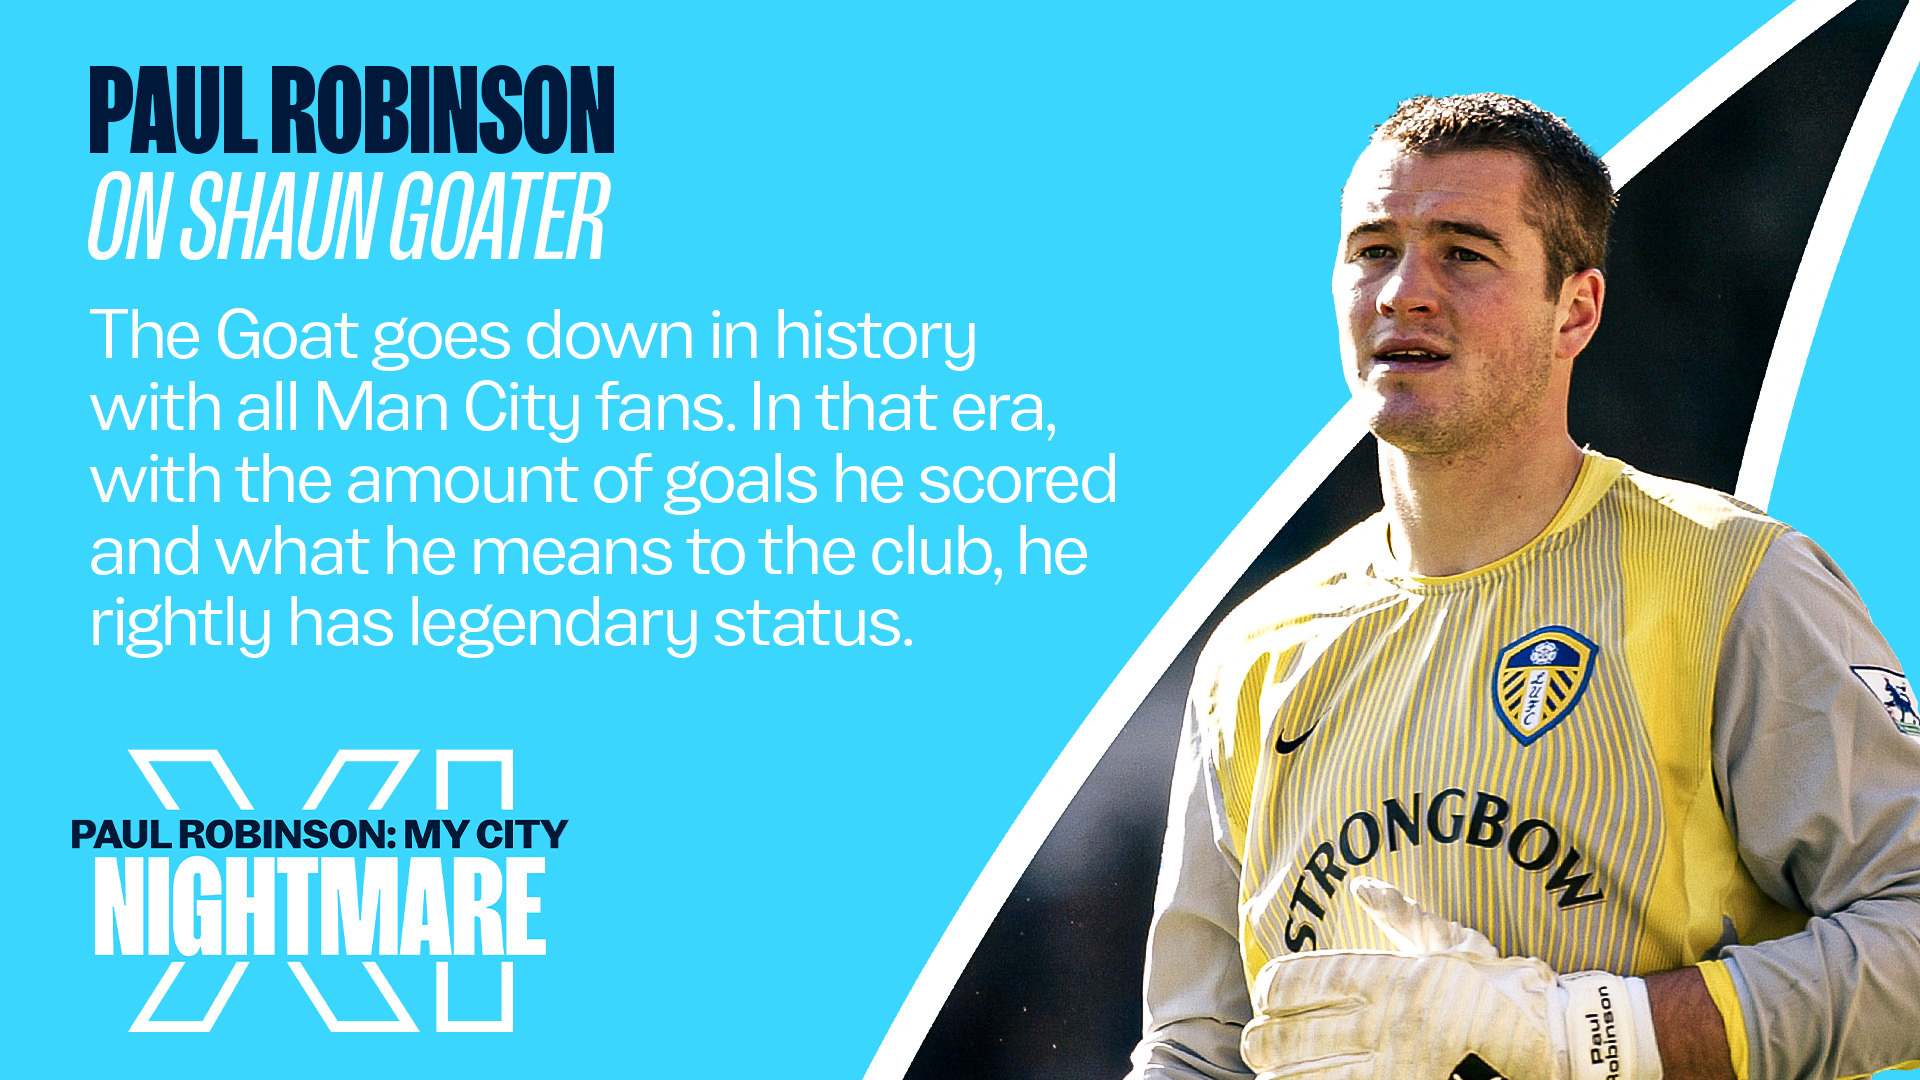 QUOTE : Paul Robinson on Shaun Goater